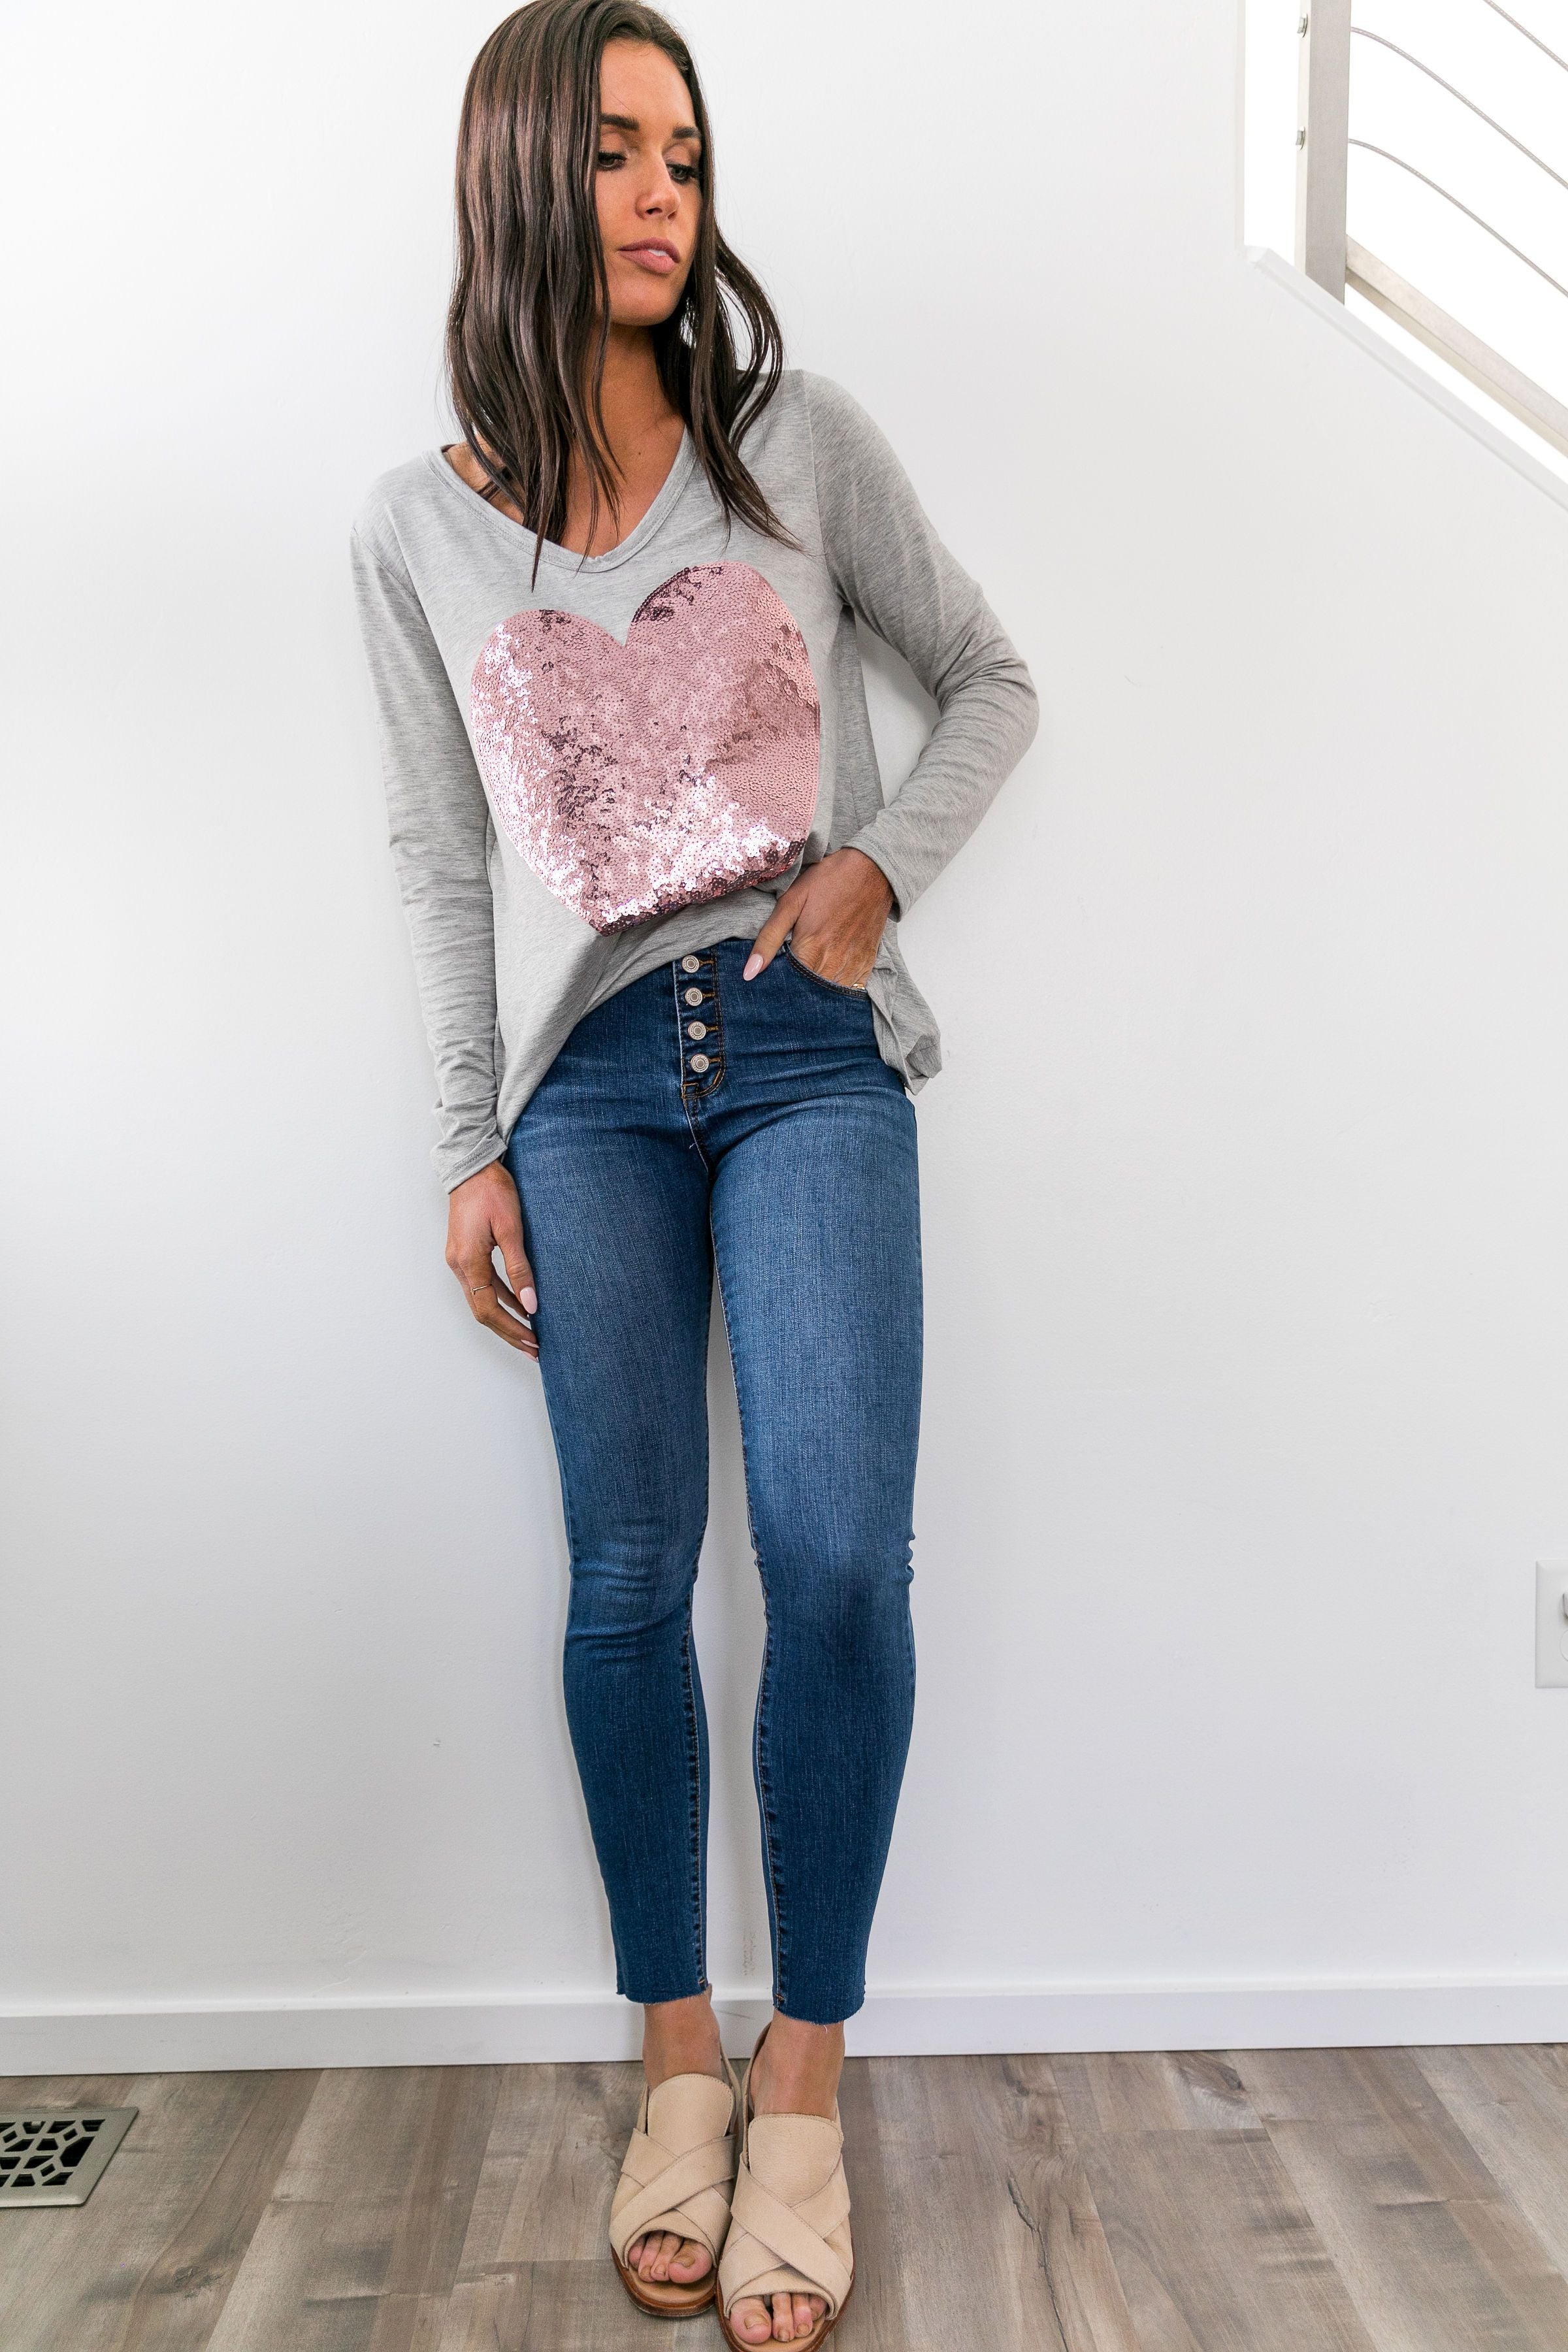 On The Fly High-Rise Skinnies - ALL SALES FINAL